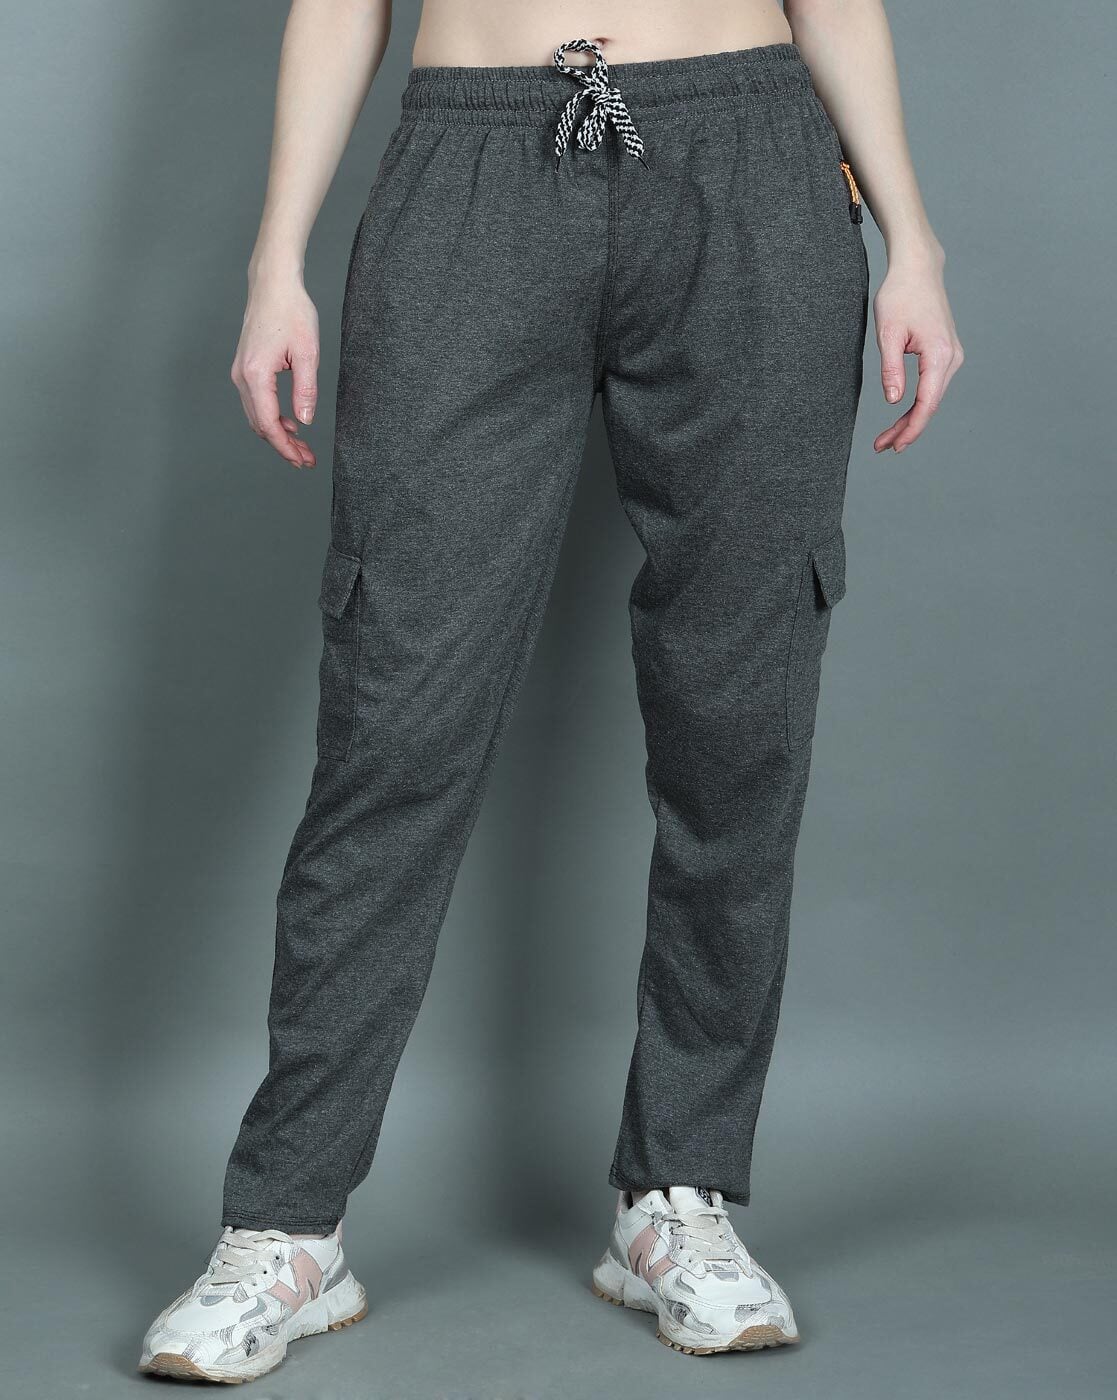 Buy DYWER Joggers Track Pants with mobile pocket, Stretchable